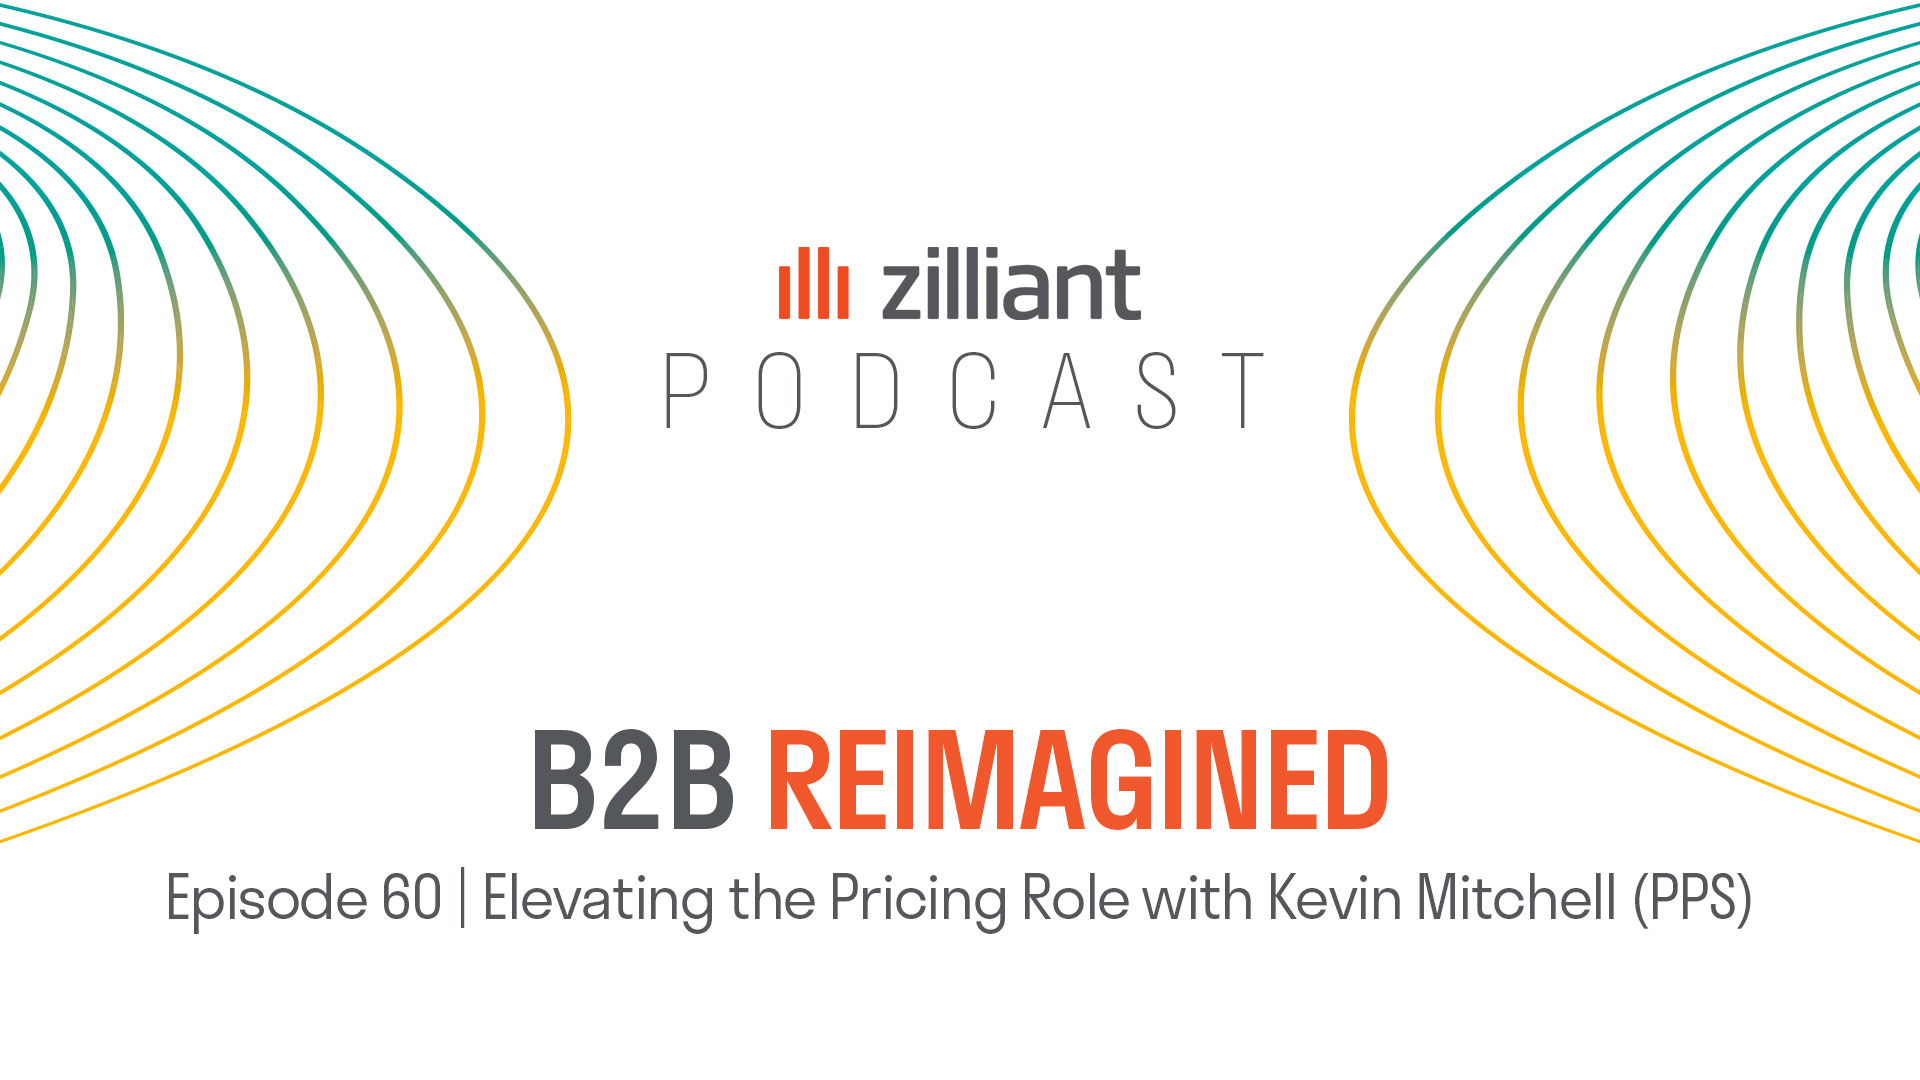 Elevating the Pricing Role with Kevin Mitchell (PPS)